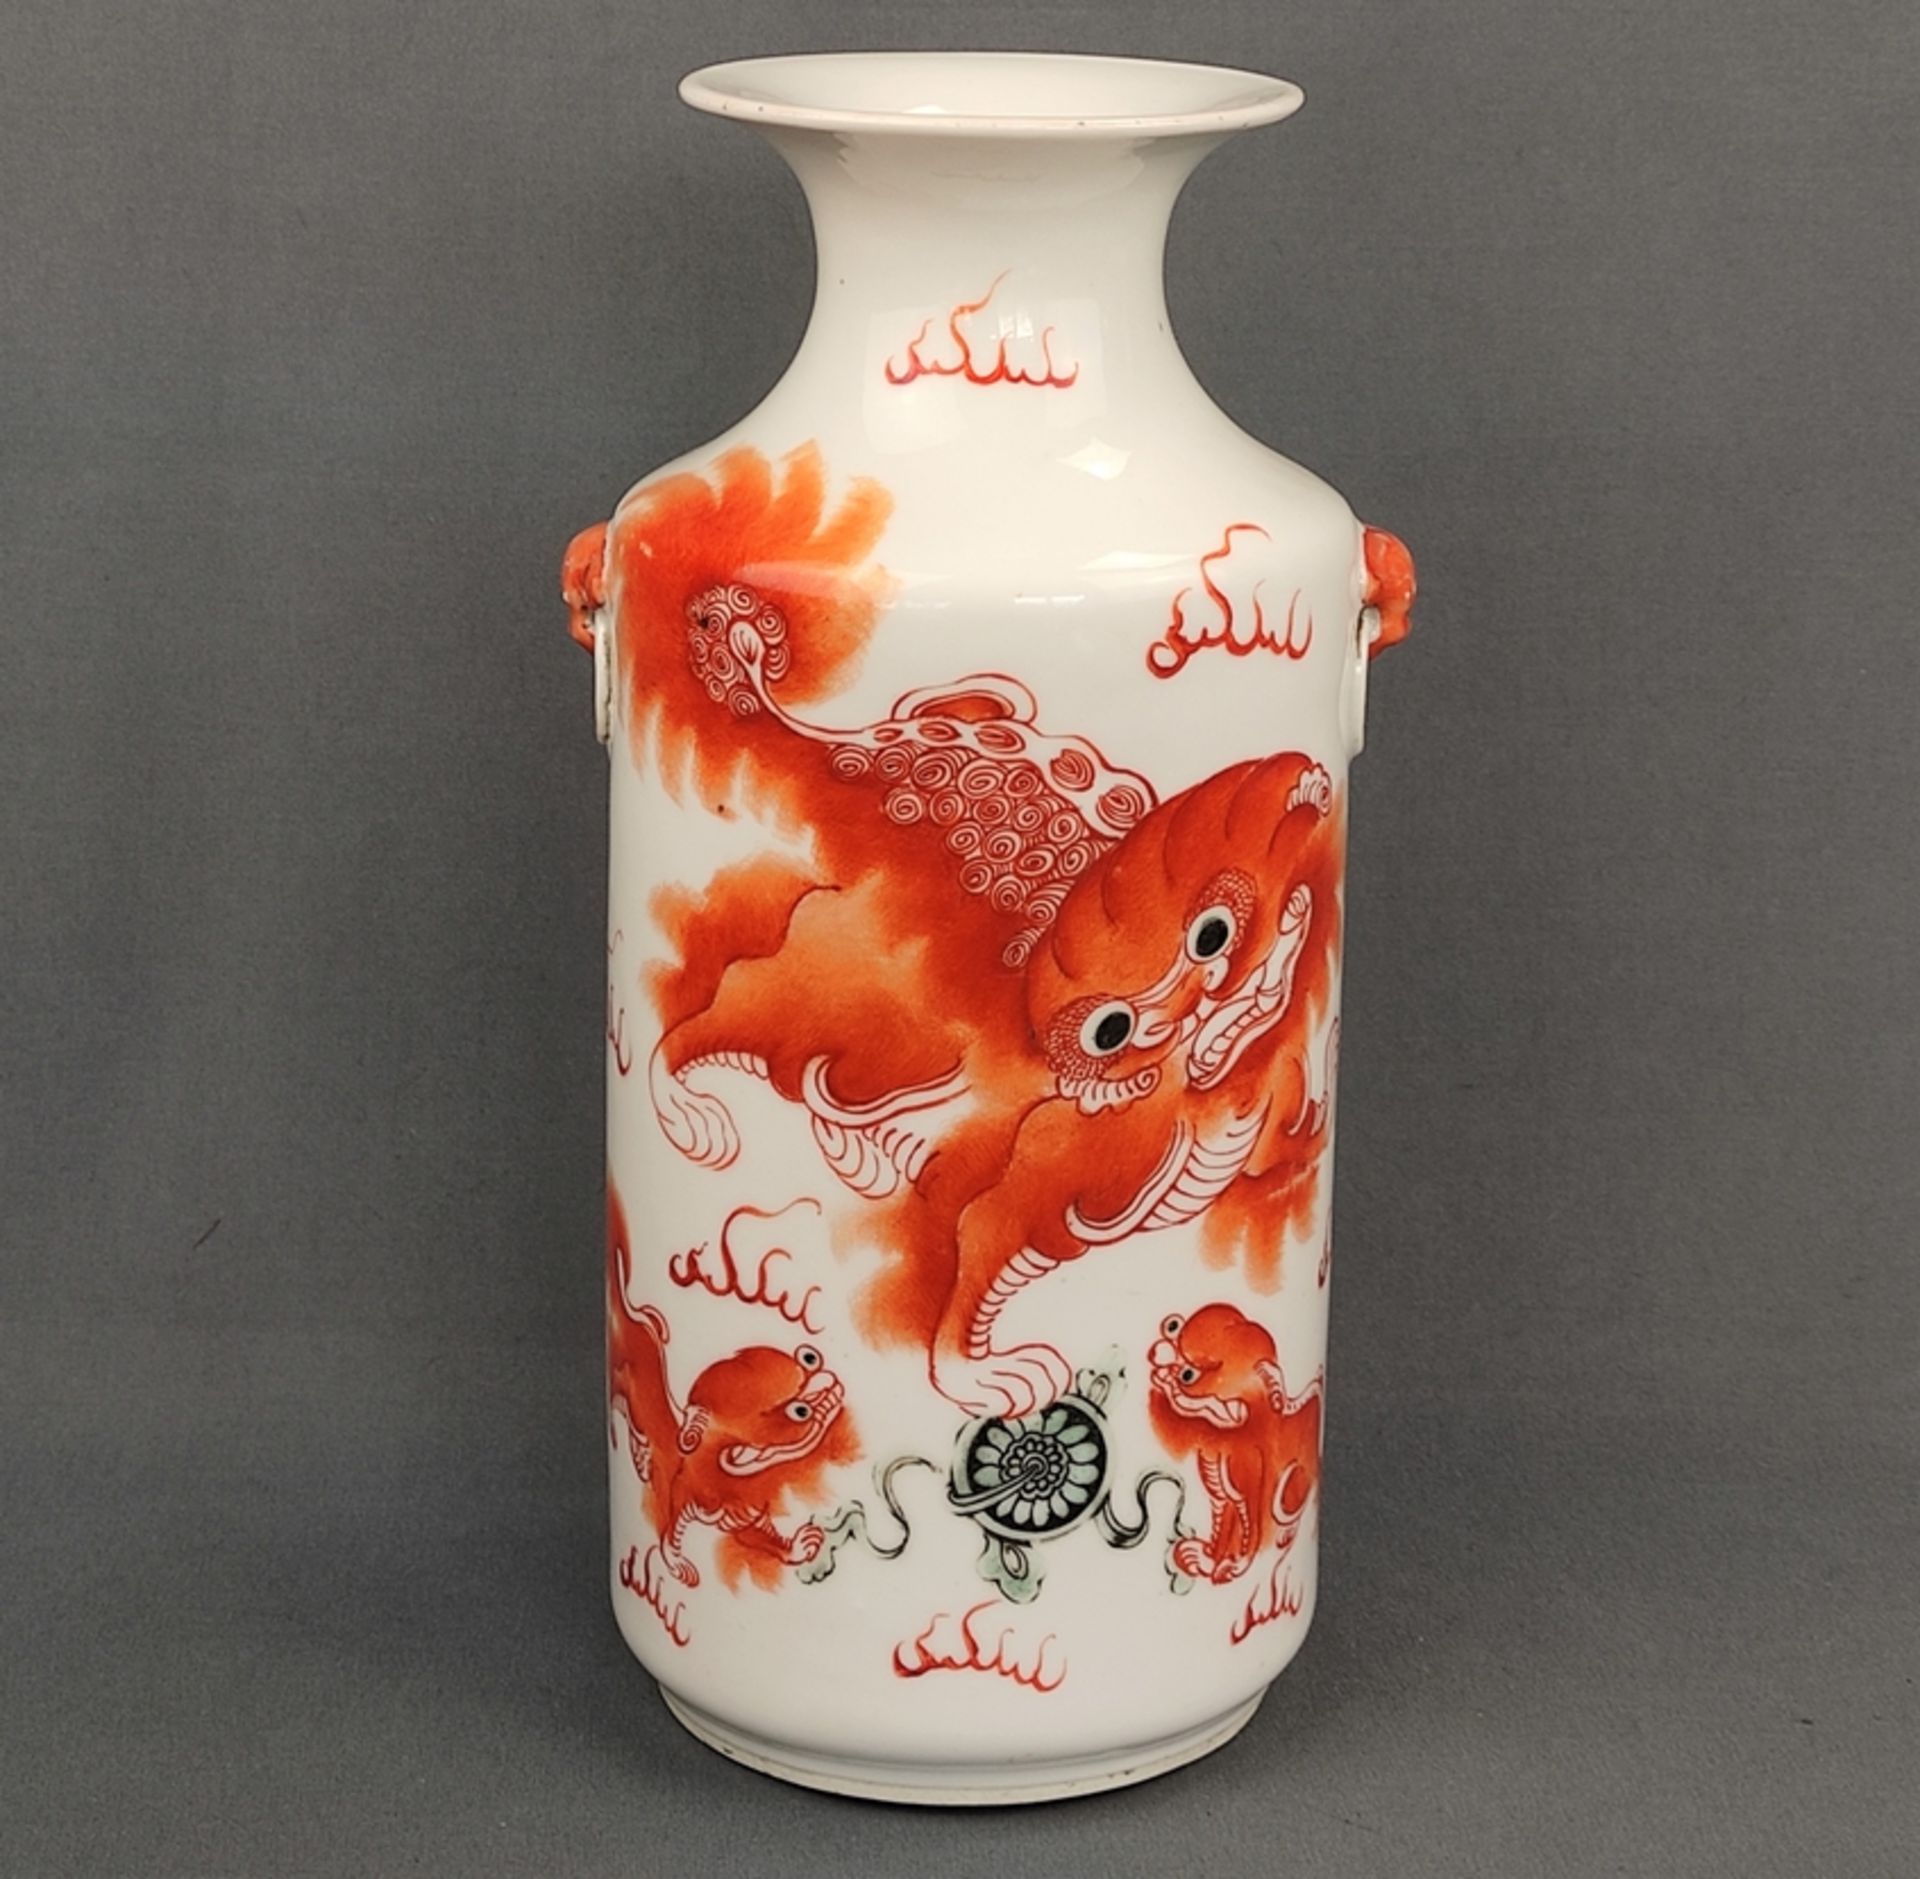 Vase, China, barrel-shaped body with short neck and flared rim, decorated in orange with dragon, ba